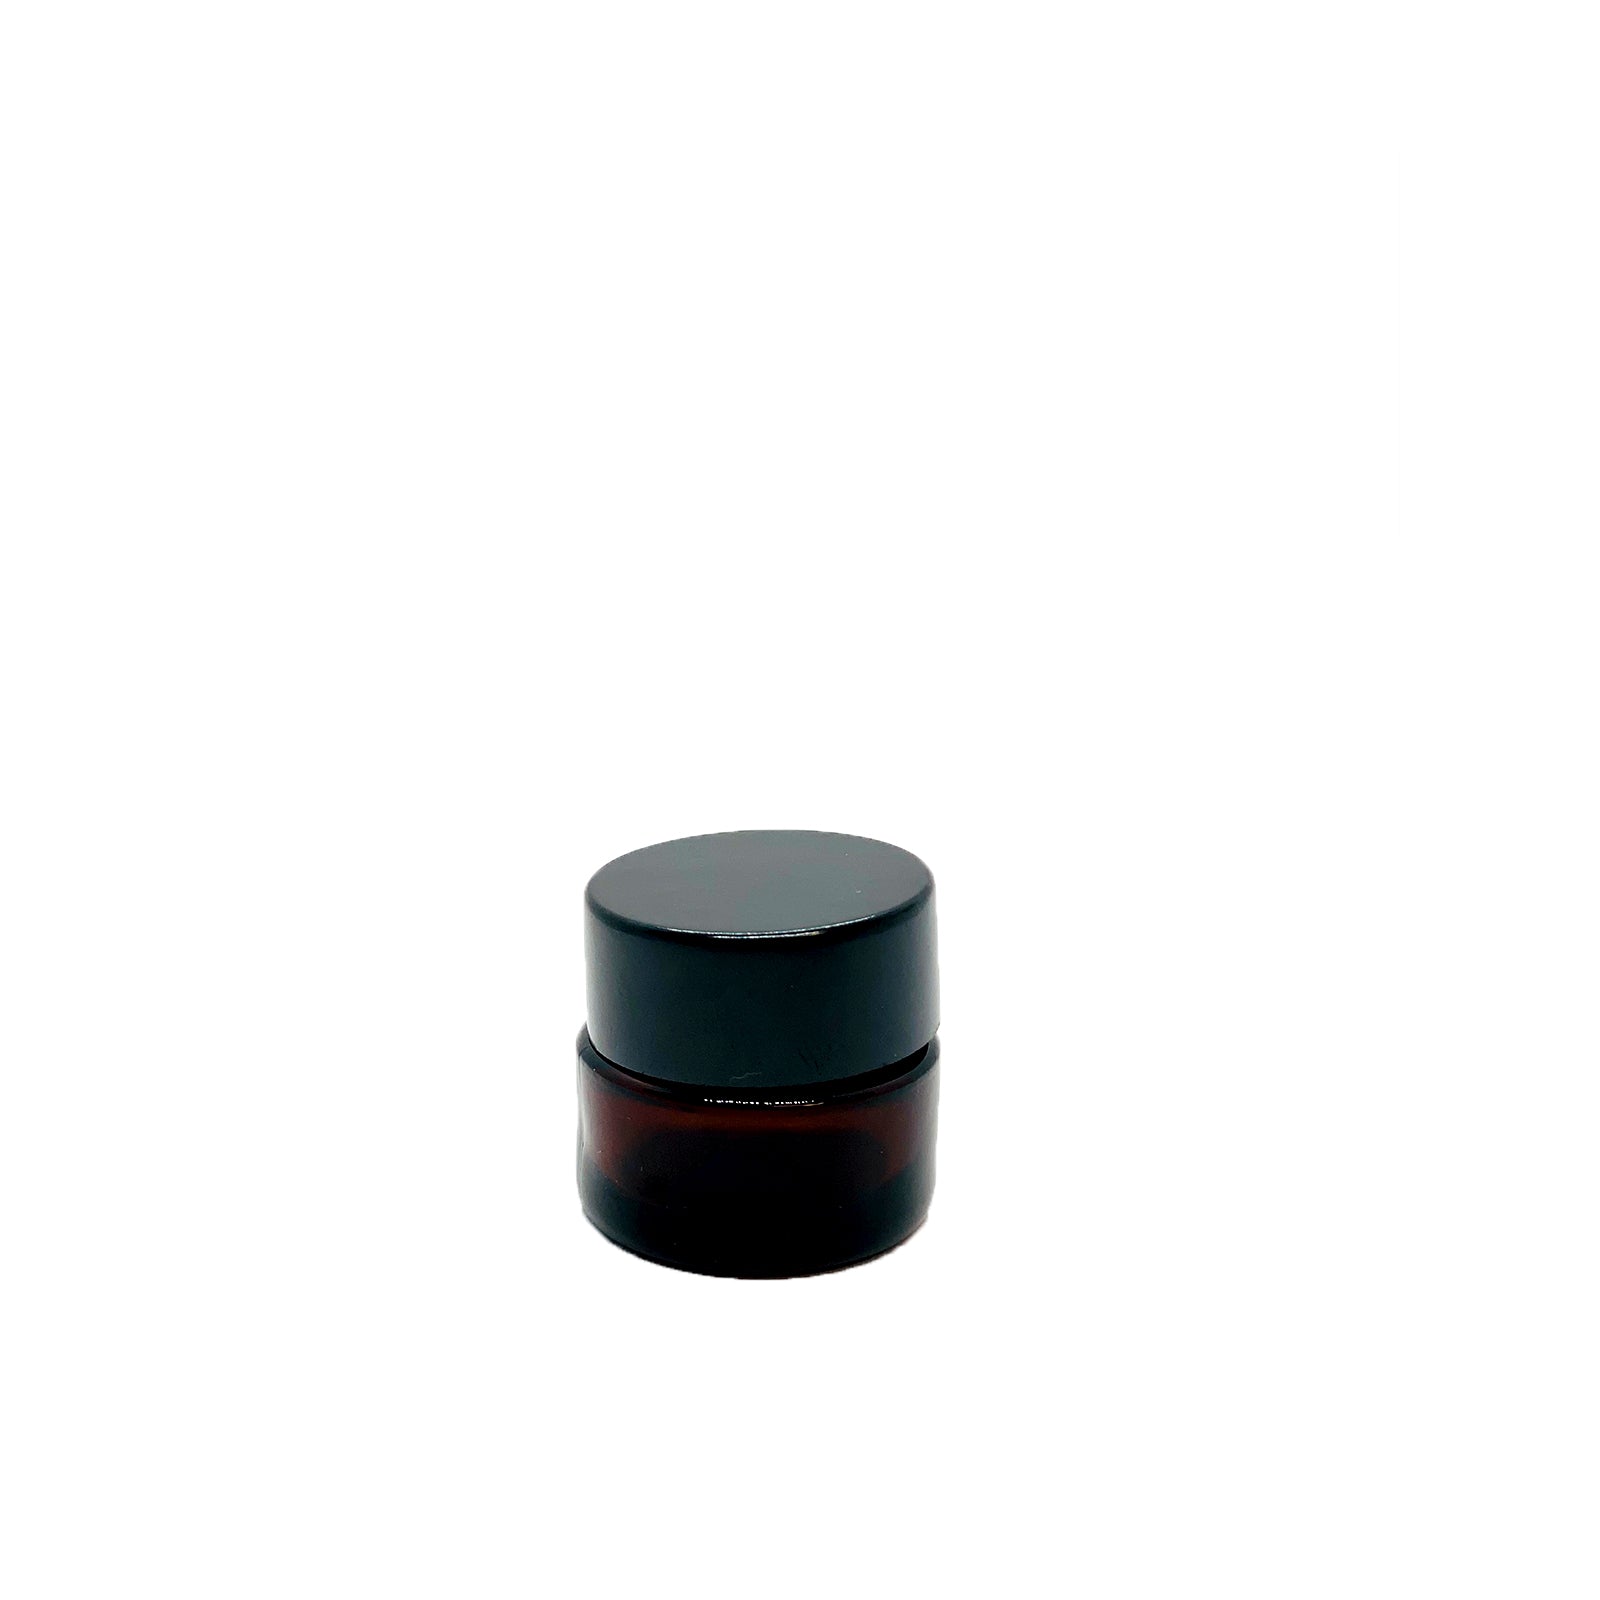 Glass Containers for Cosmetic Storage with Cap 5ml-250ml